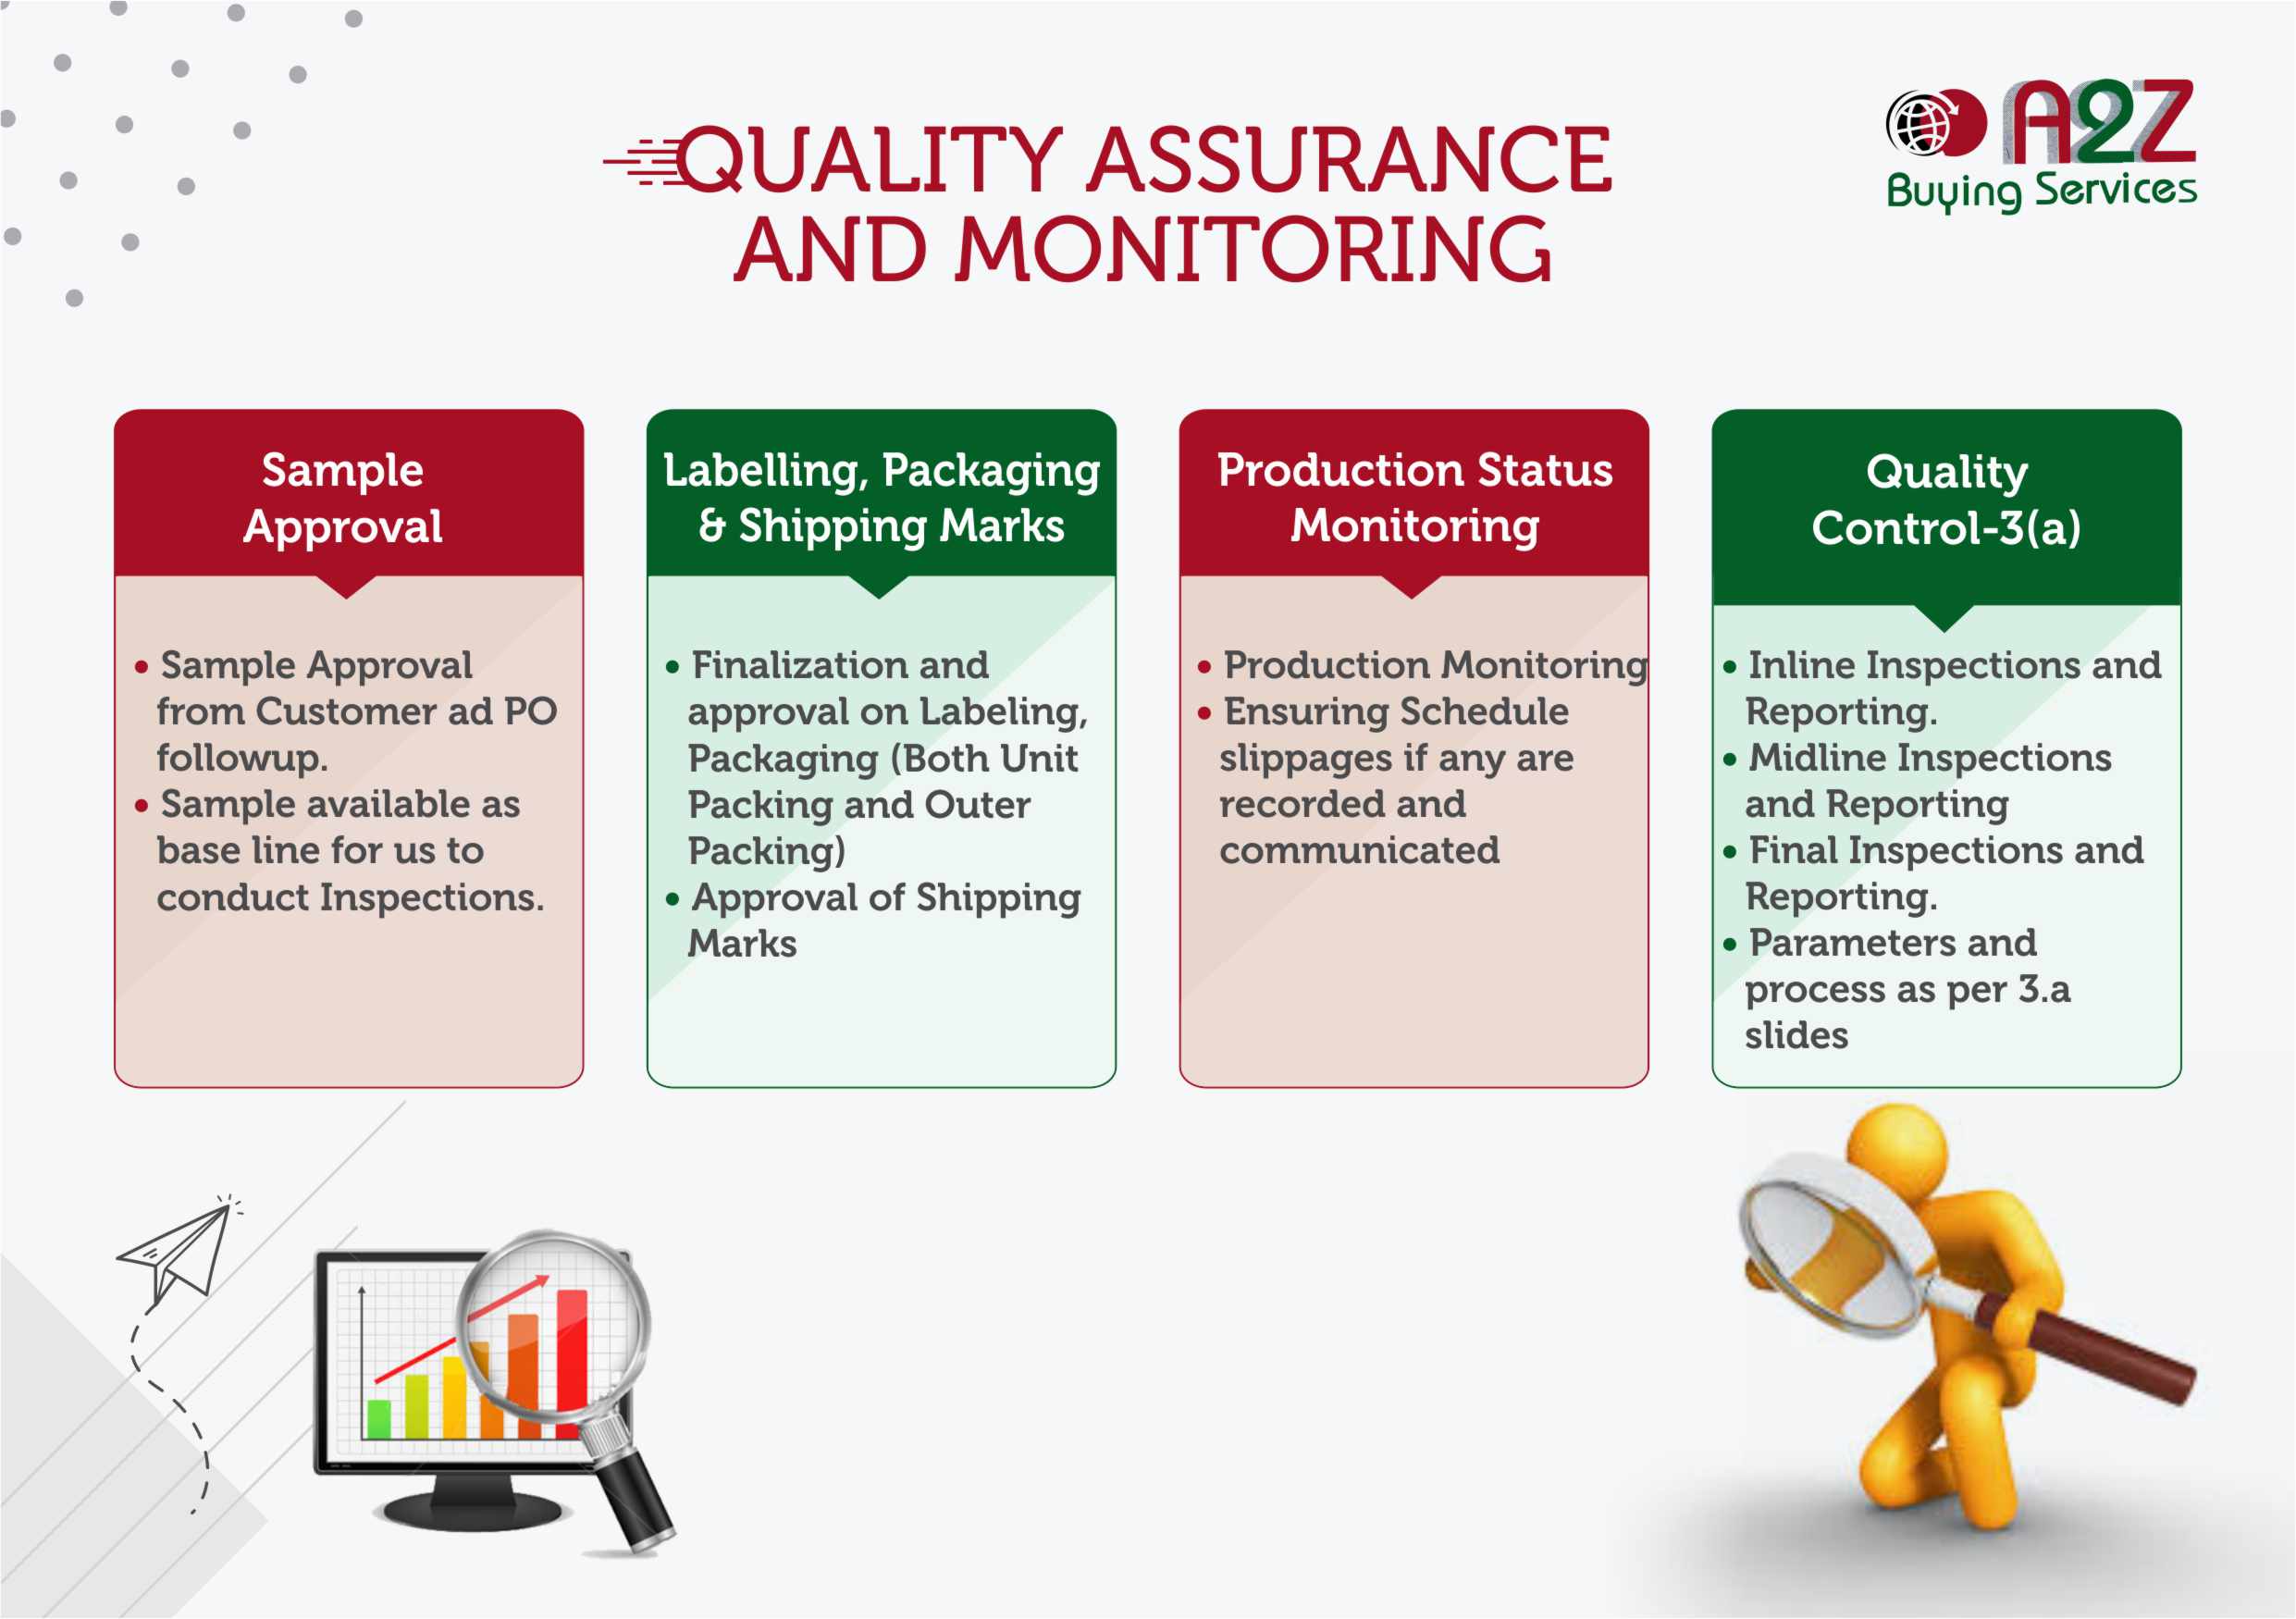 Quality Assurance Services in Jaipur